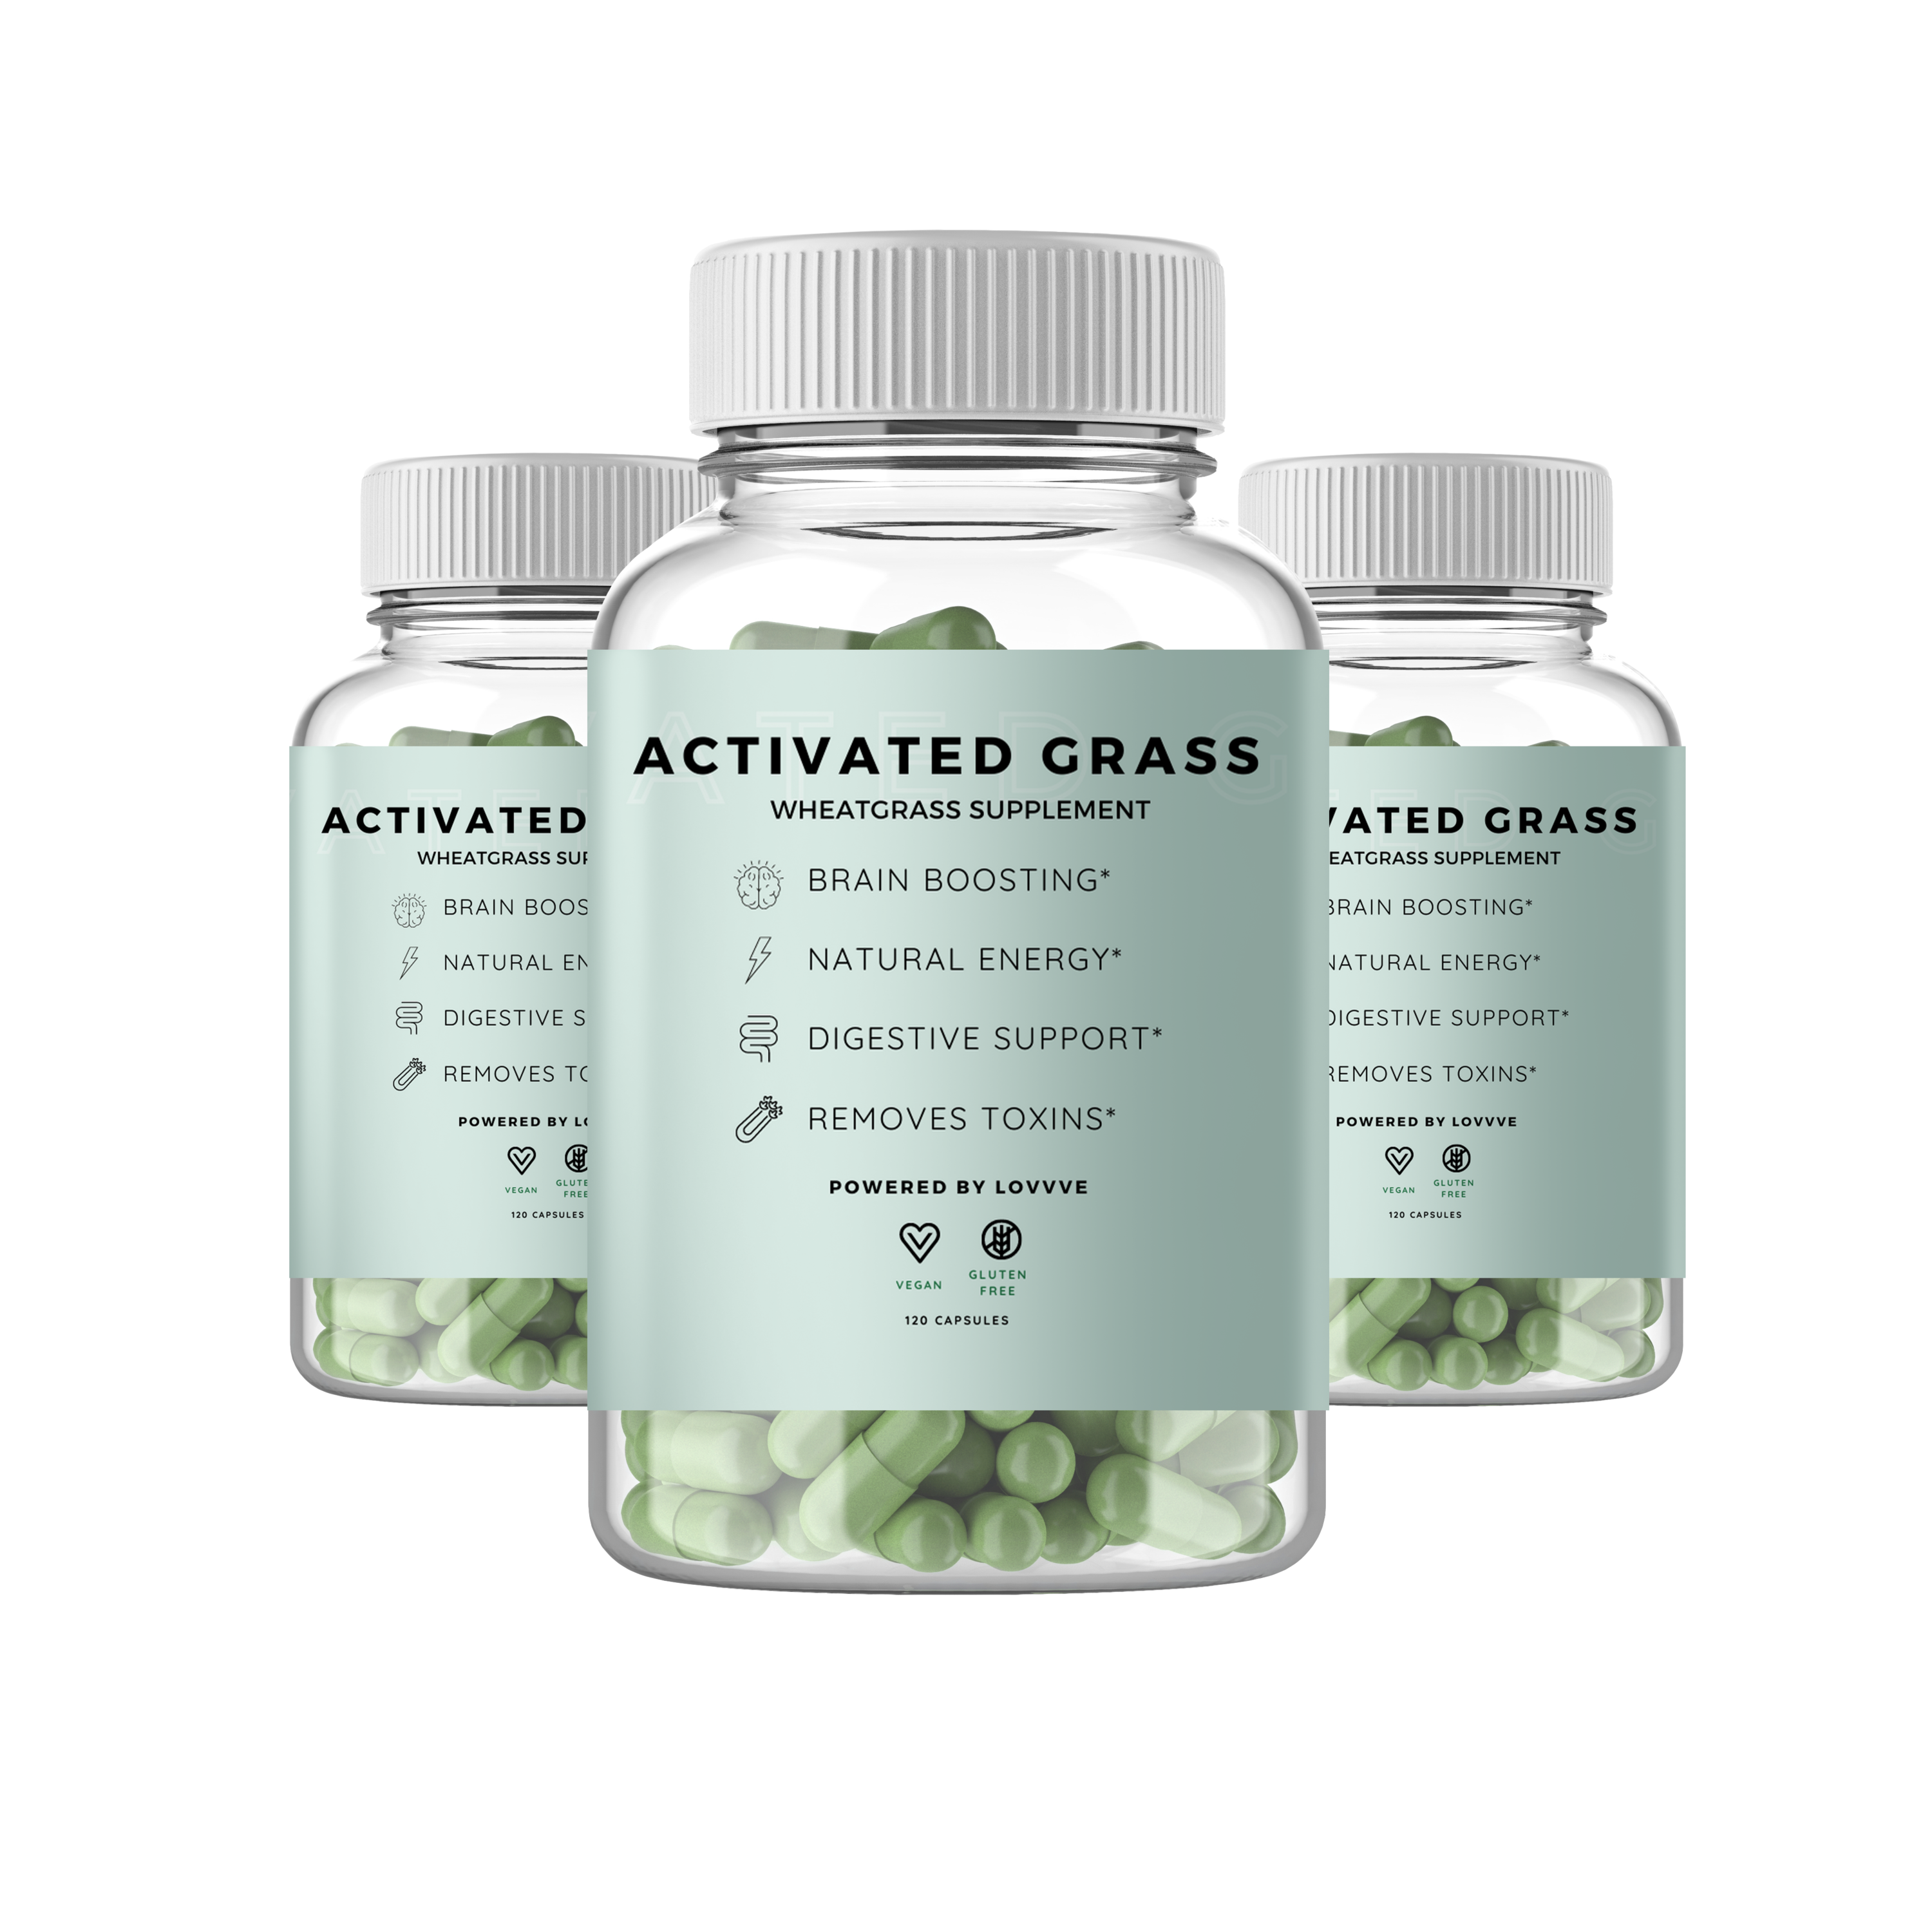 Activated Grass 3-pack